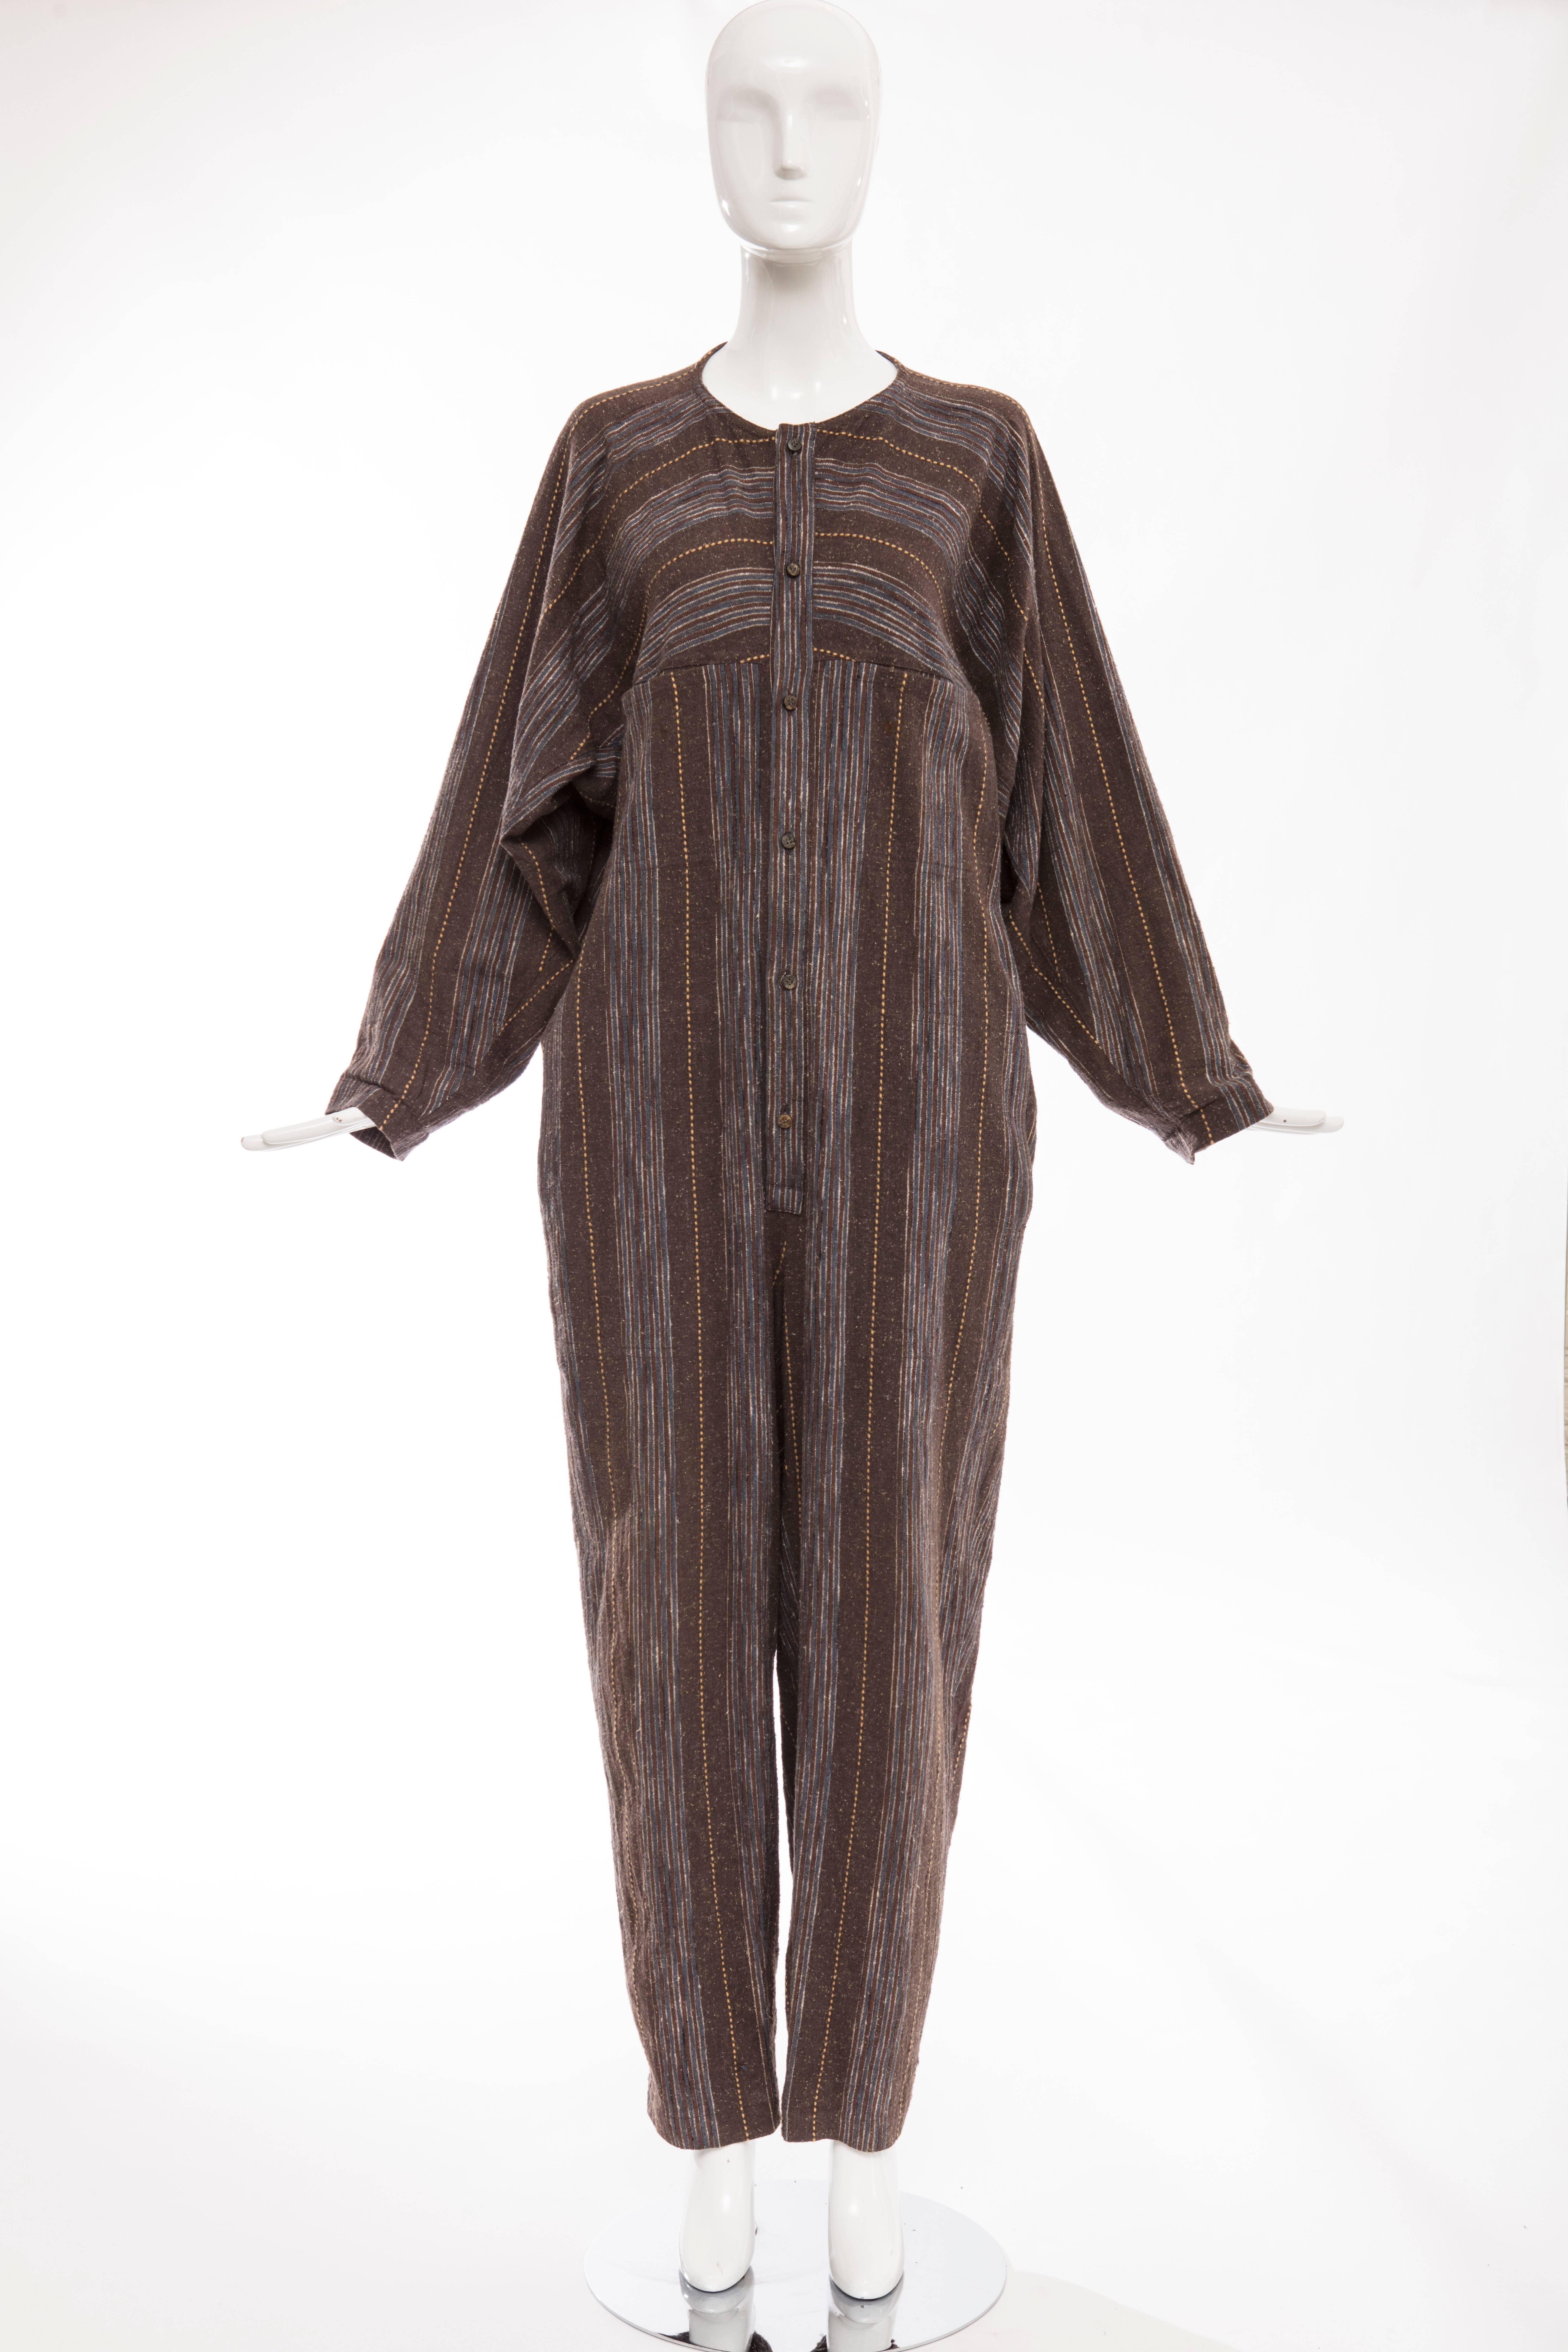 Issey Miyake Plantation, circa 1980's blue chocolate brown striped woven medium weight cotton jumpsuit with front wood button closure and two front pockets.

Japan: Medium

Bust 54